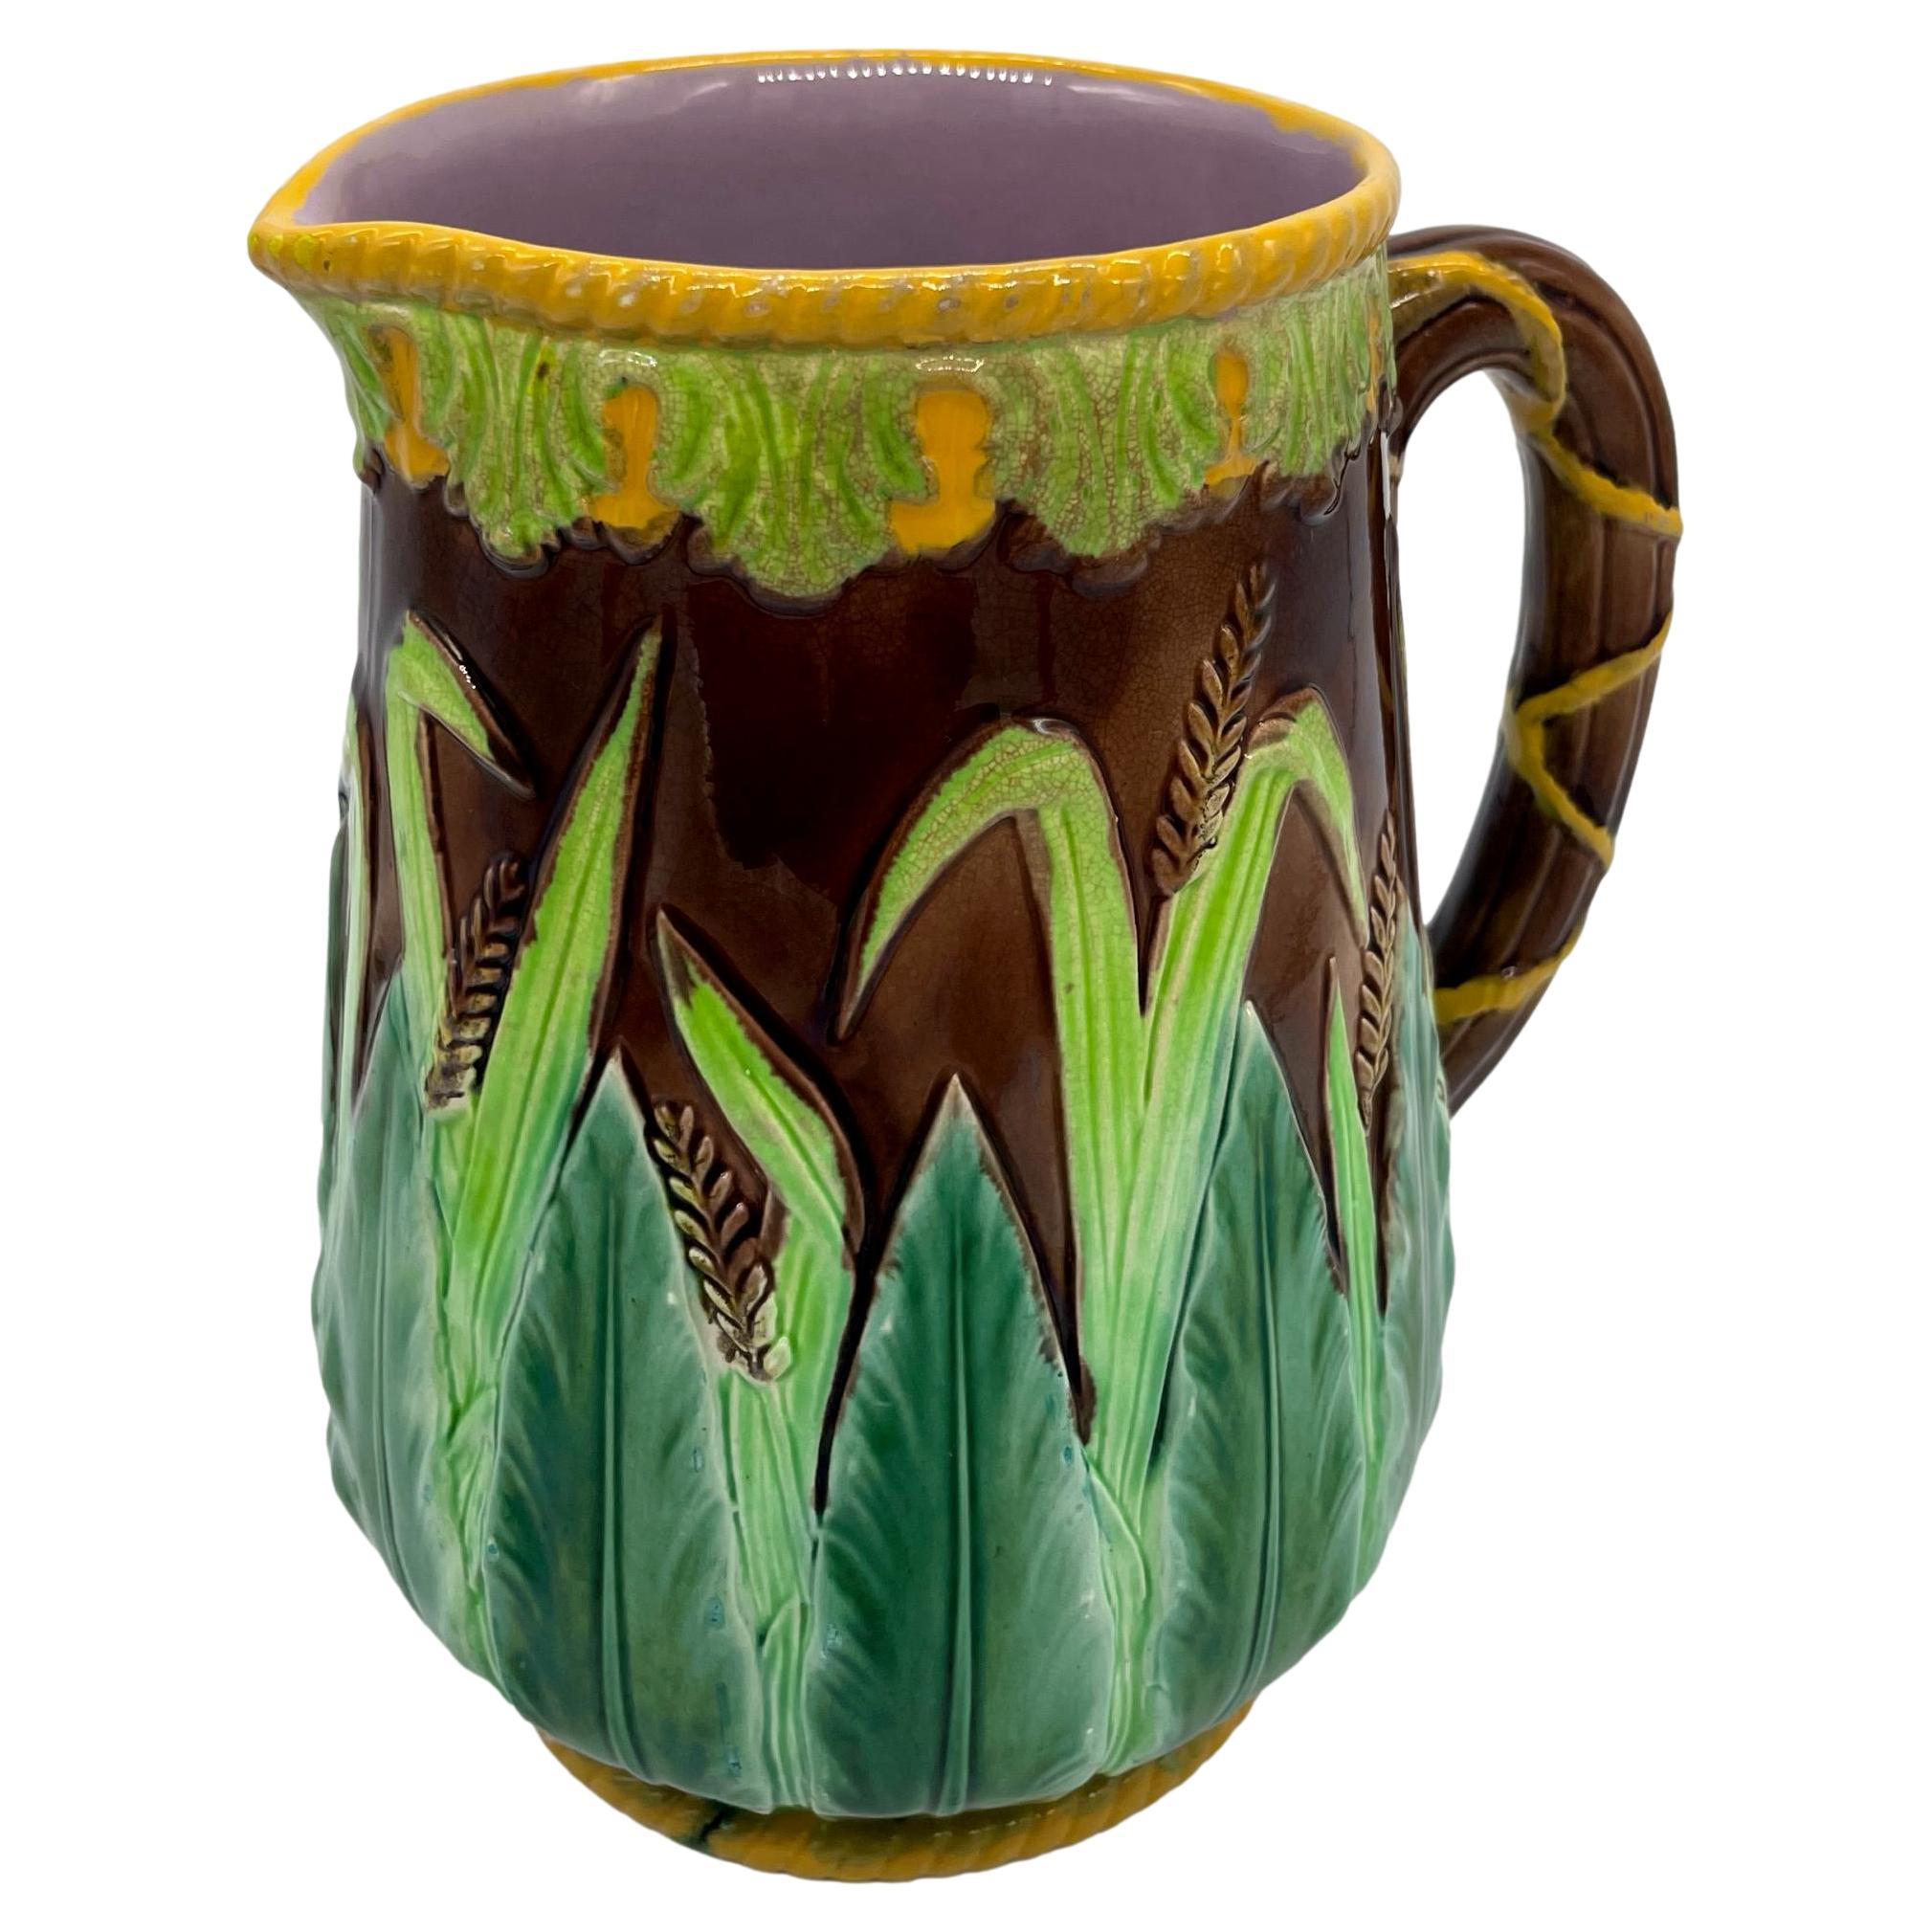 Large George Jones Majolica Wheat Pitcher with Green Acanthus Leaves, ca. 1875